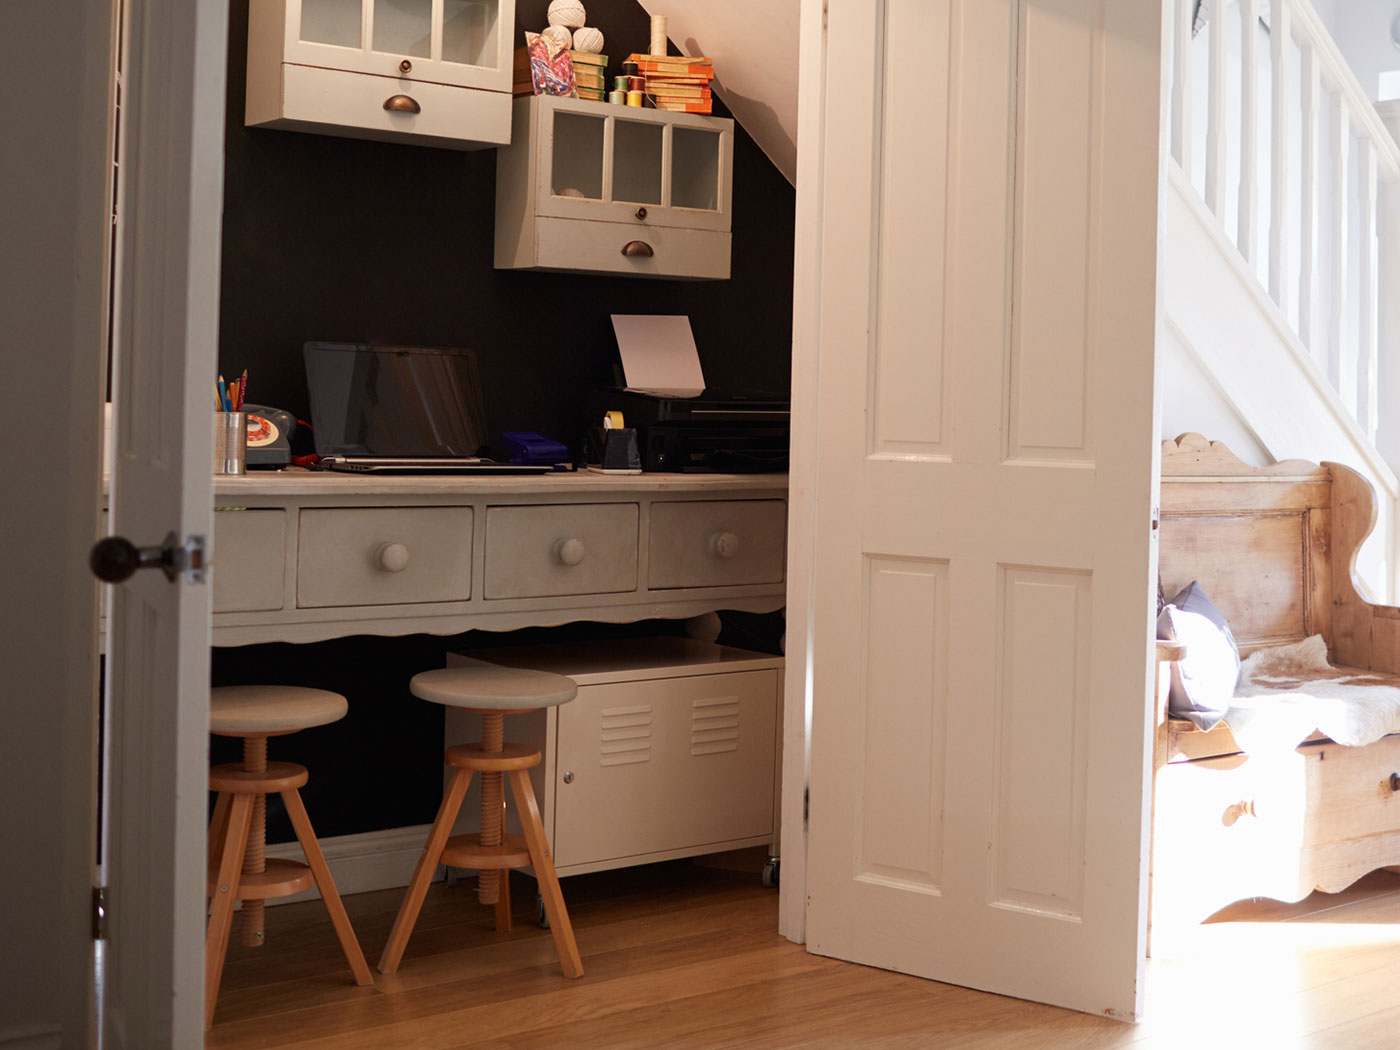 Home Office Closet Built-in - Craftworks Custom Cabinetry